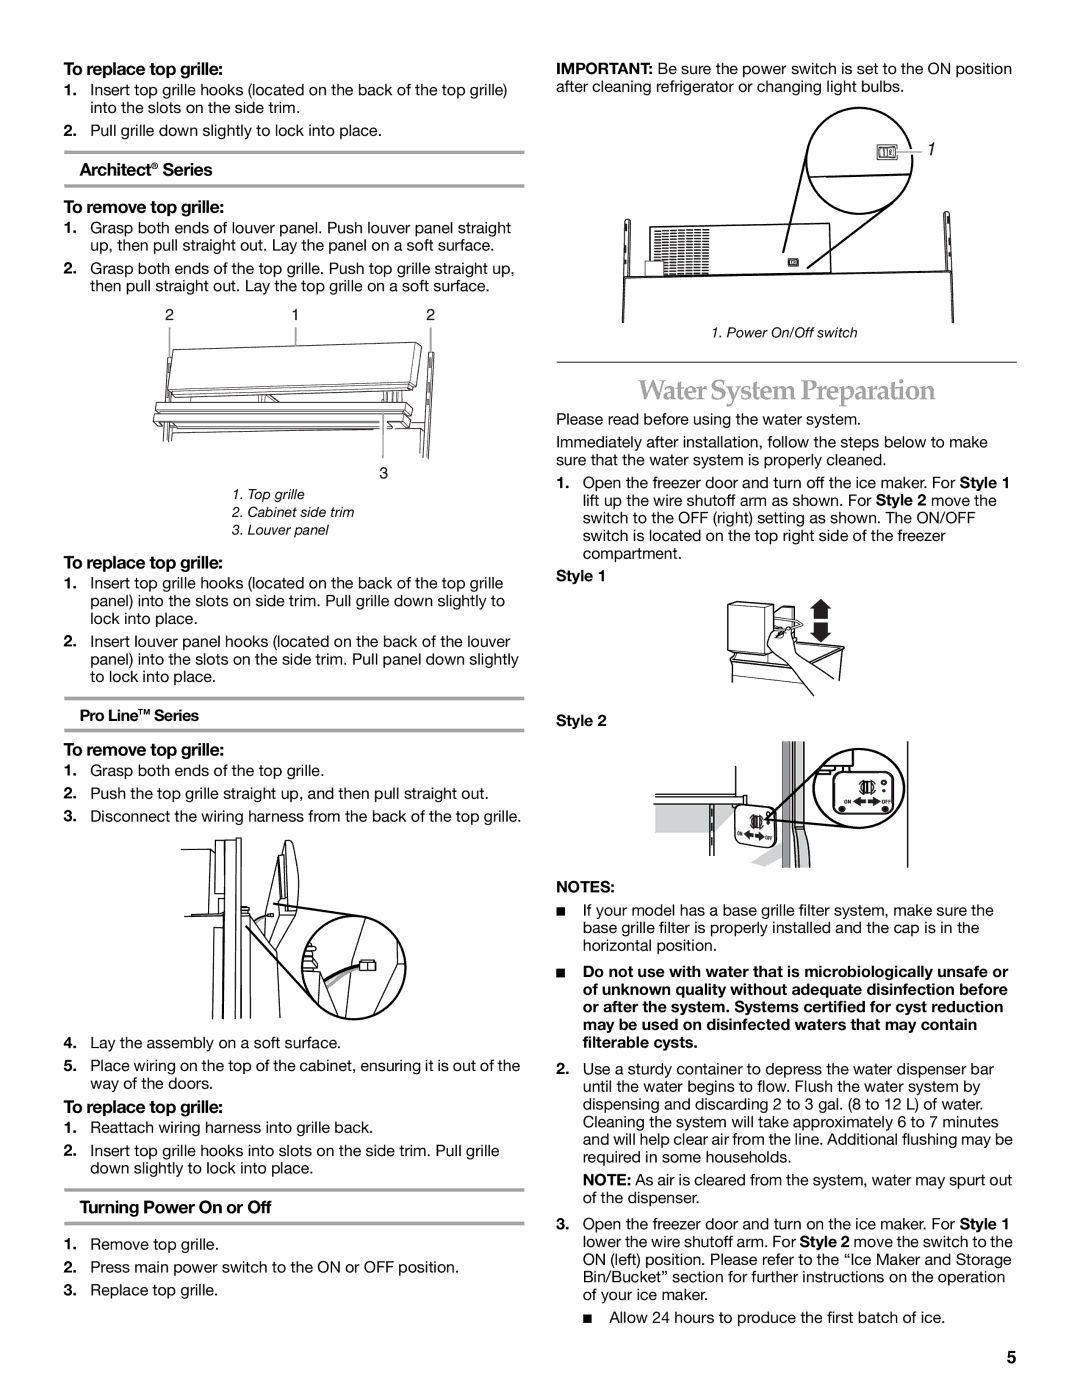 KitchenAid Side-by-Side Referigerator manual Water System Preparation, To replace top grille, Turning Power On or Off 